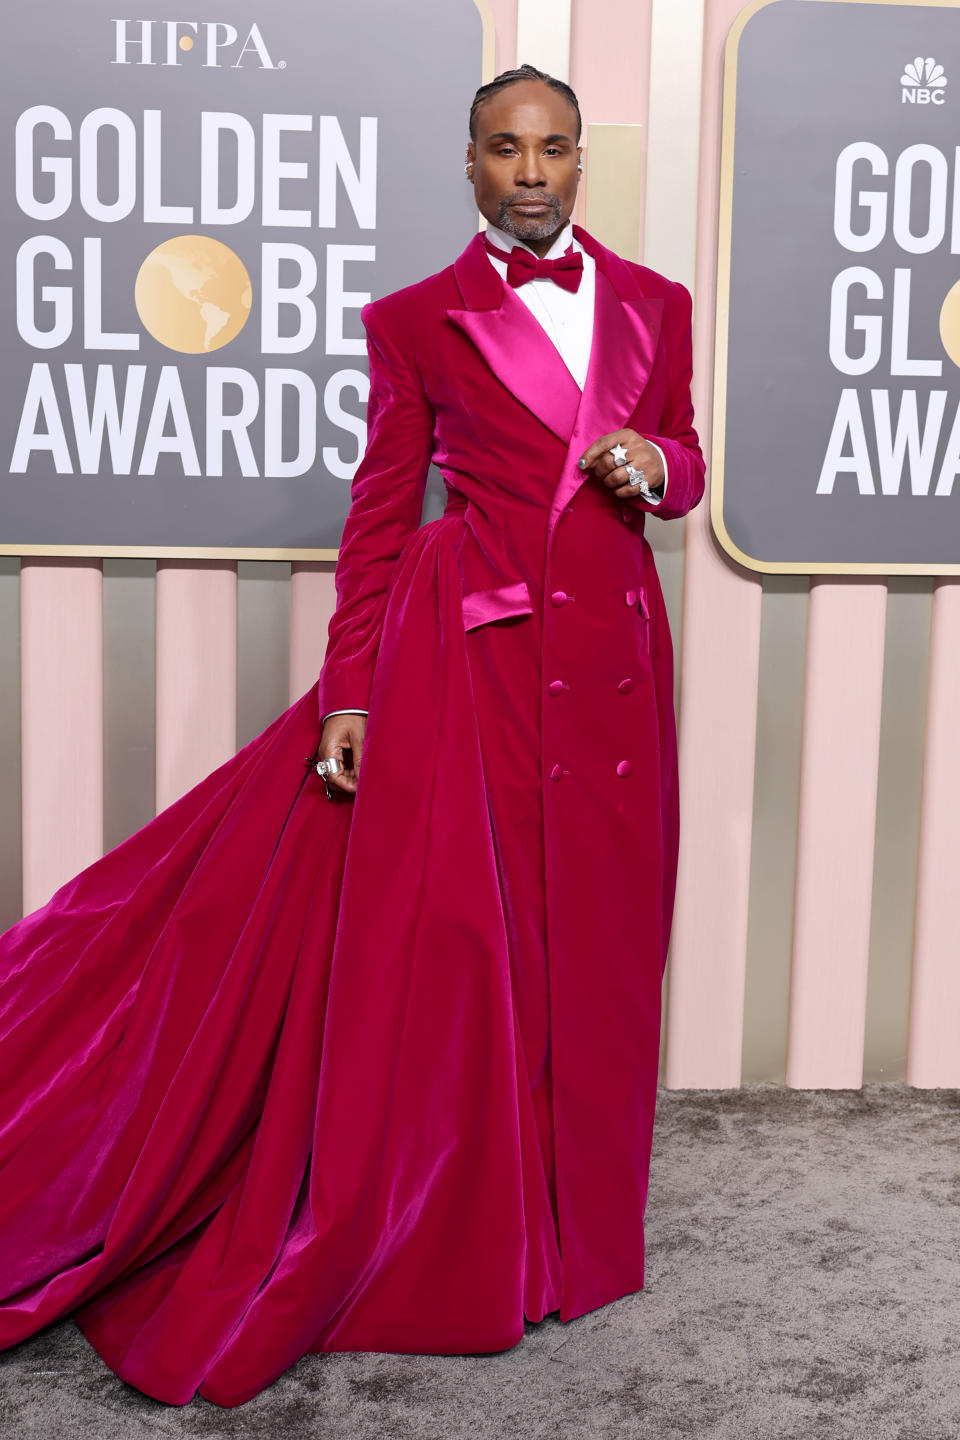 BEVERLY HILLS, CALIFORNIA - JANUARY 10: Billy Porter attends the 80th Annual Golden Globe Awards at The Beverly Hilton on January 10, 2023 in Beverly Hills, California. (Photo by Amy Sussman/Getty Images)